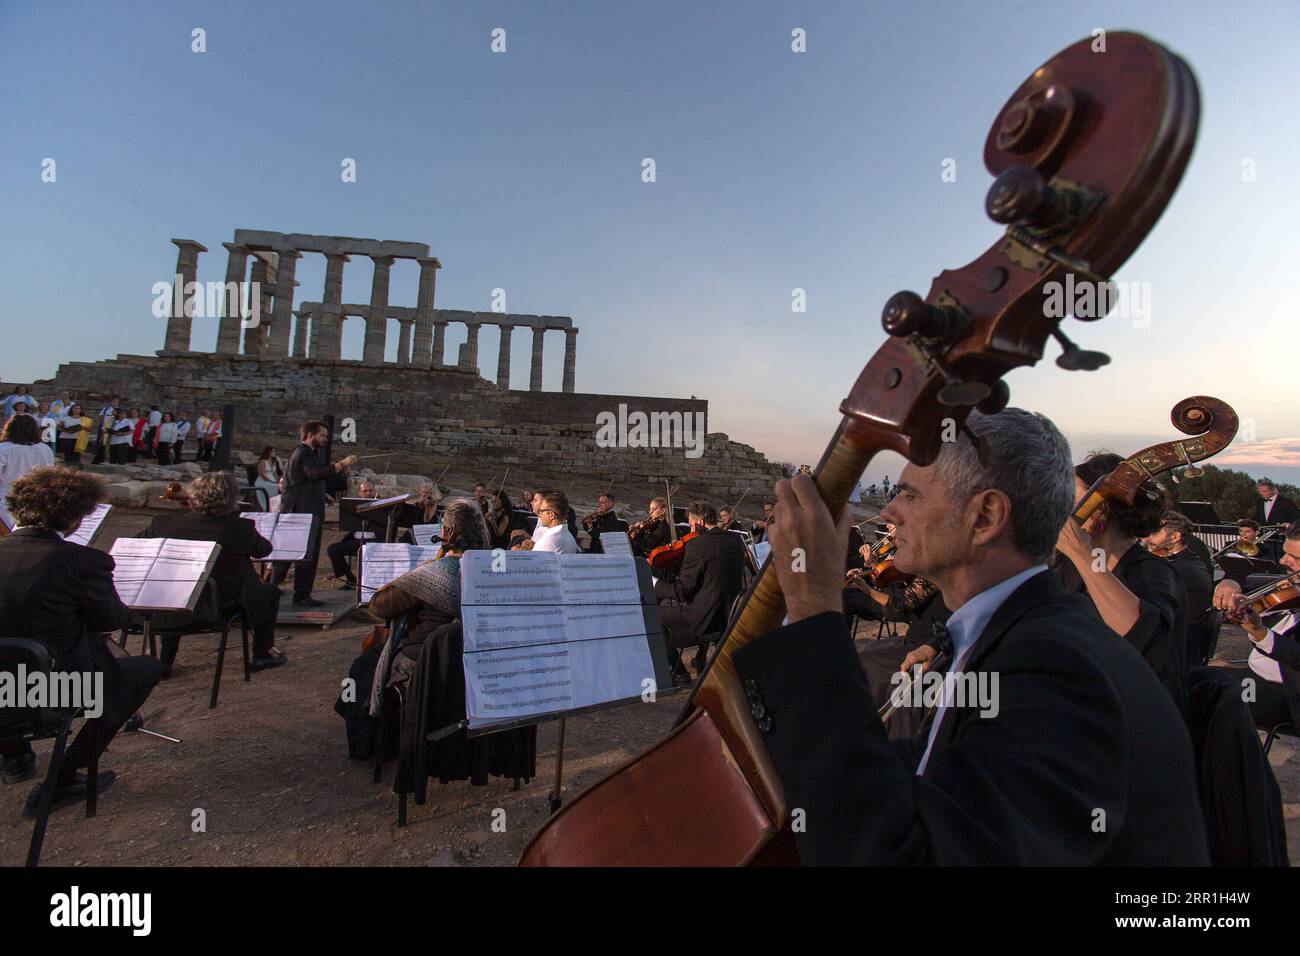 200917 -- ATHENS, Sept. 17, 2020 -- Musicians perform a musical in front of the ruins of the Temple of Poseidon at cape Sounion, some 70 km southeast of Athens, Greece, on Sept. 17, 2020. On the occasion of the 70th anniversary of the establishment of the Greek National Tourism Organization GNTO and the 71st anniversary of the founding of the People s Republic of China and the Mid-Autumn festival, a musical entitled As long as there shall be Achaeans -- Variations on a Sunbeam was staged on Thursday in front of the ruins of the emblematic 2,500-year-old Temple of Poseidon, the god of the sea i Stock Photo